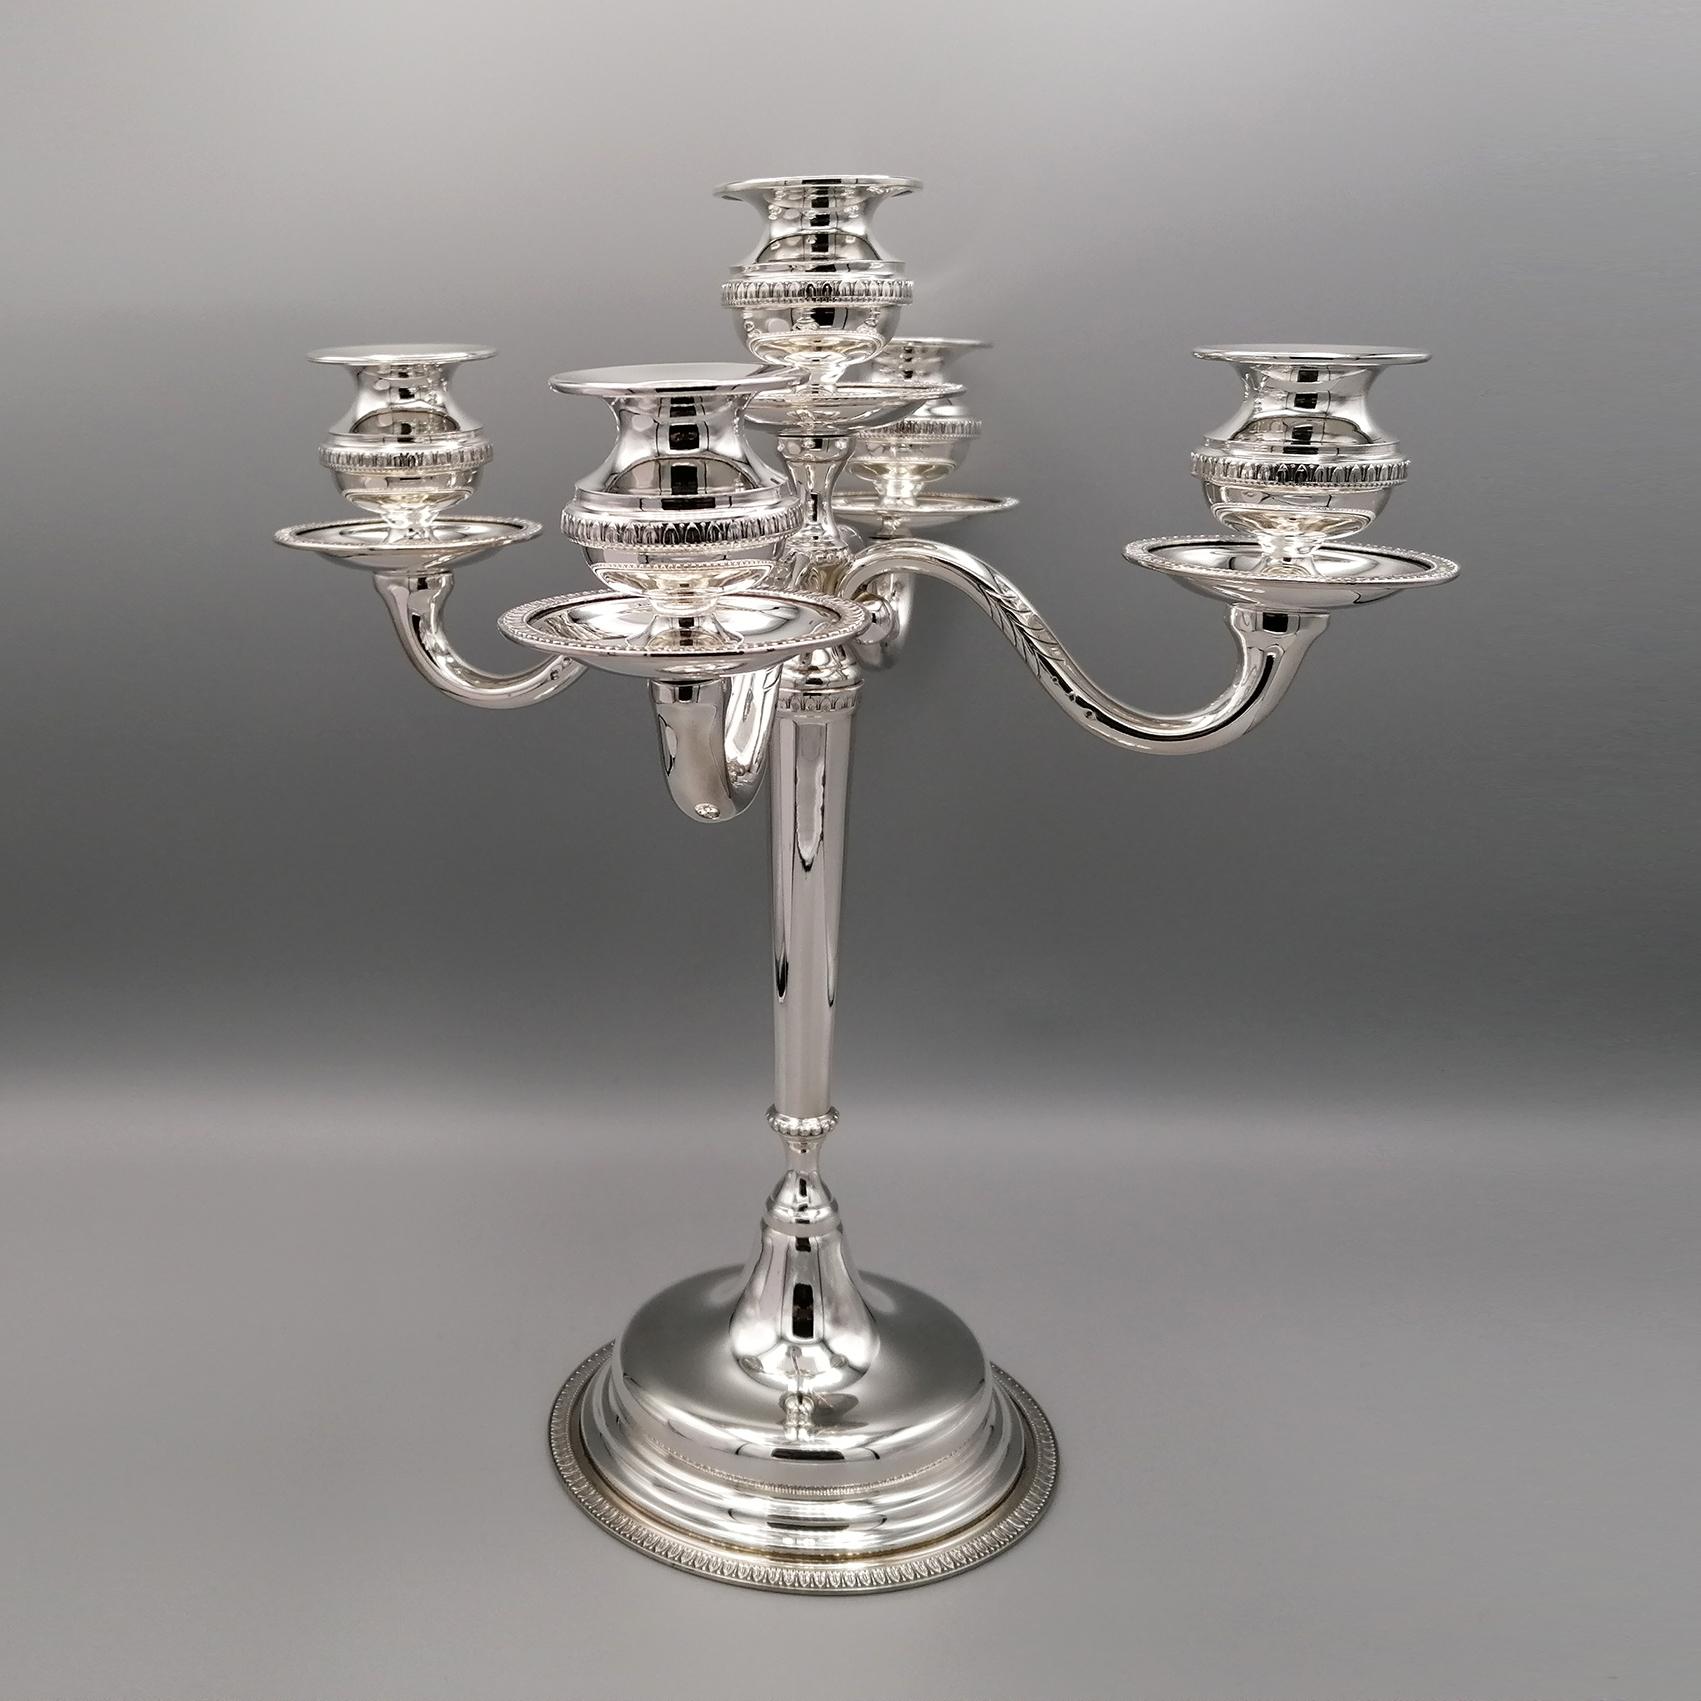 Empire style solid silver candelabra.
The border is welded on the base, on the wax collectors and on the candle holders.
The candleholders are screwed and detachable to facilitate cleaning of the candlestick.
A light chisel with a leaf design